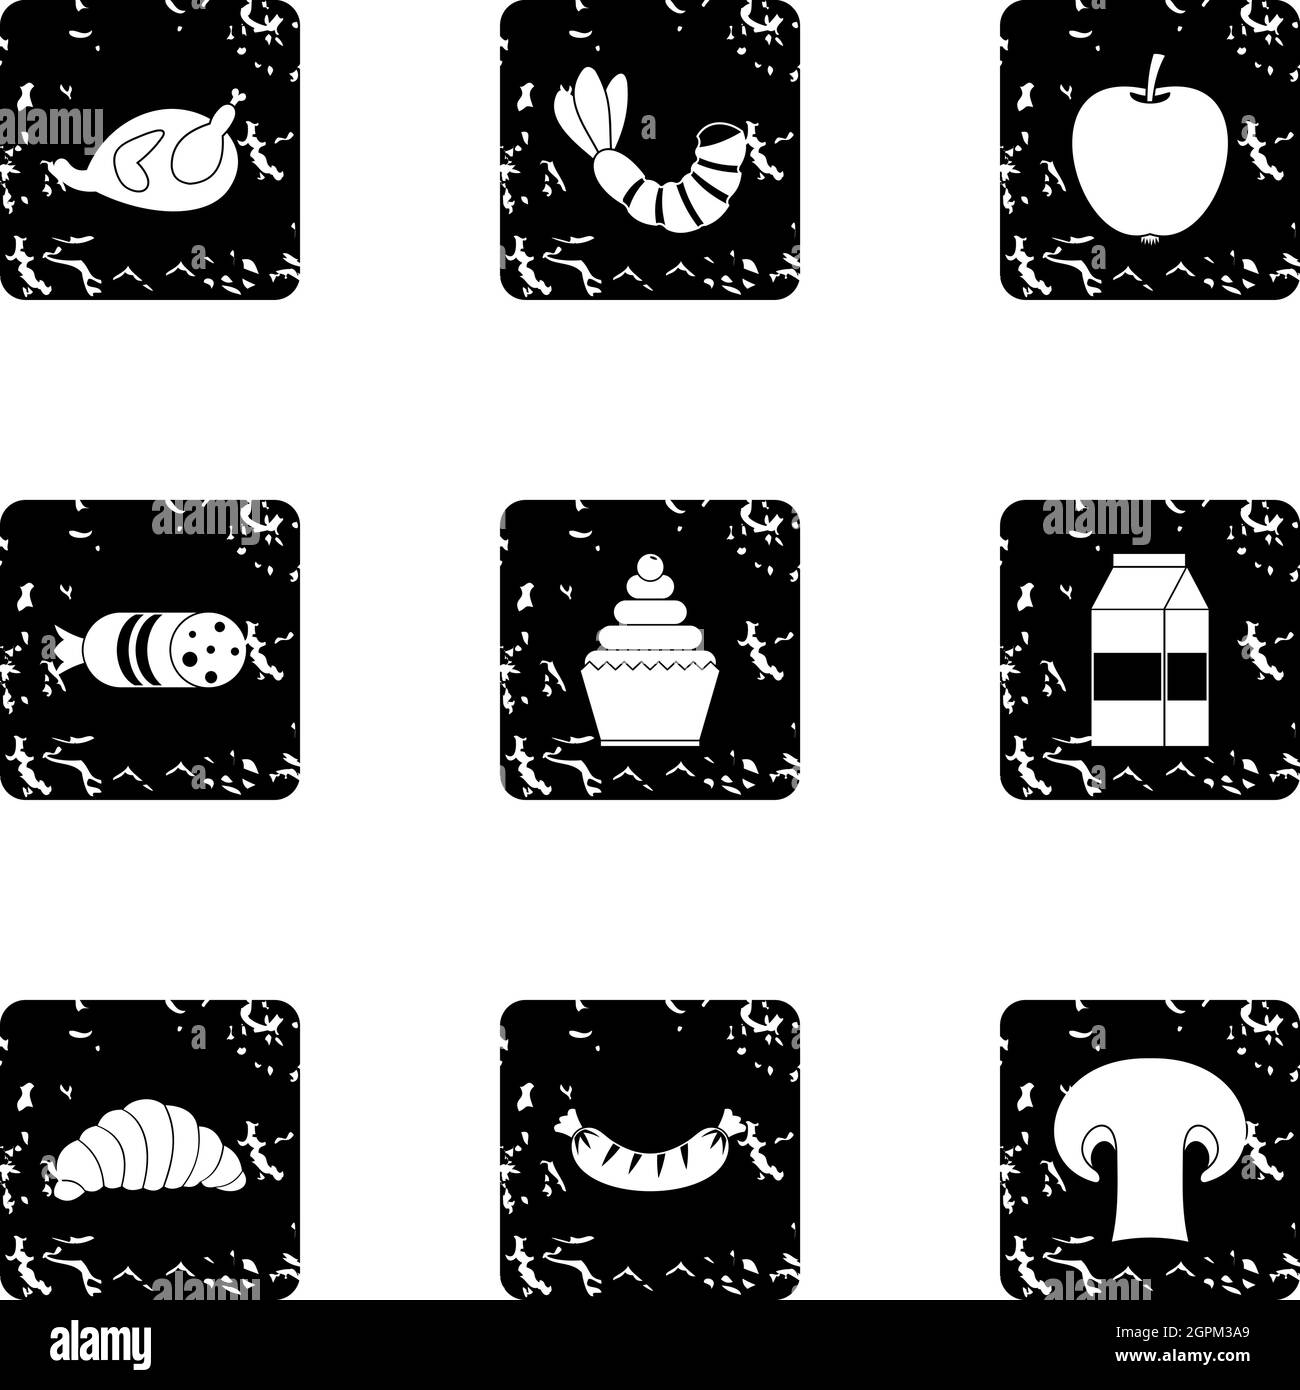 Brunch icons set, grunge style Stock Vector